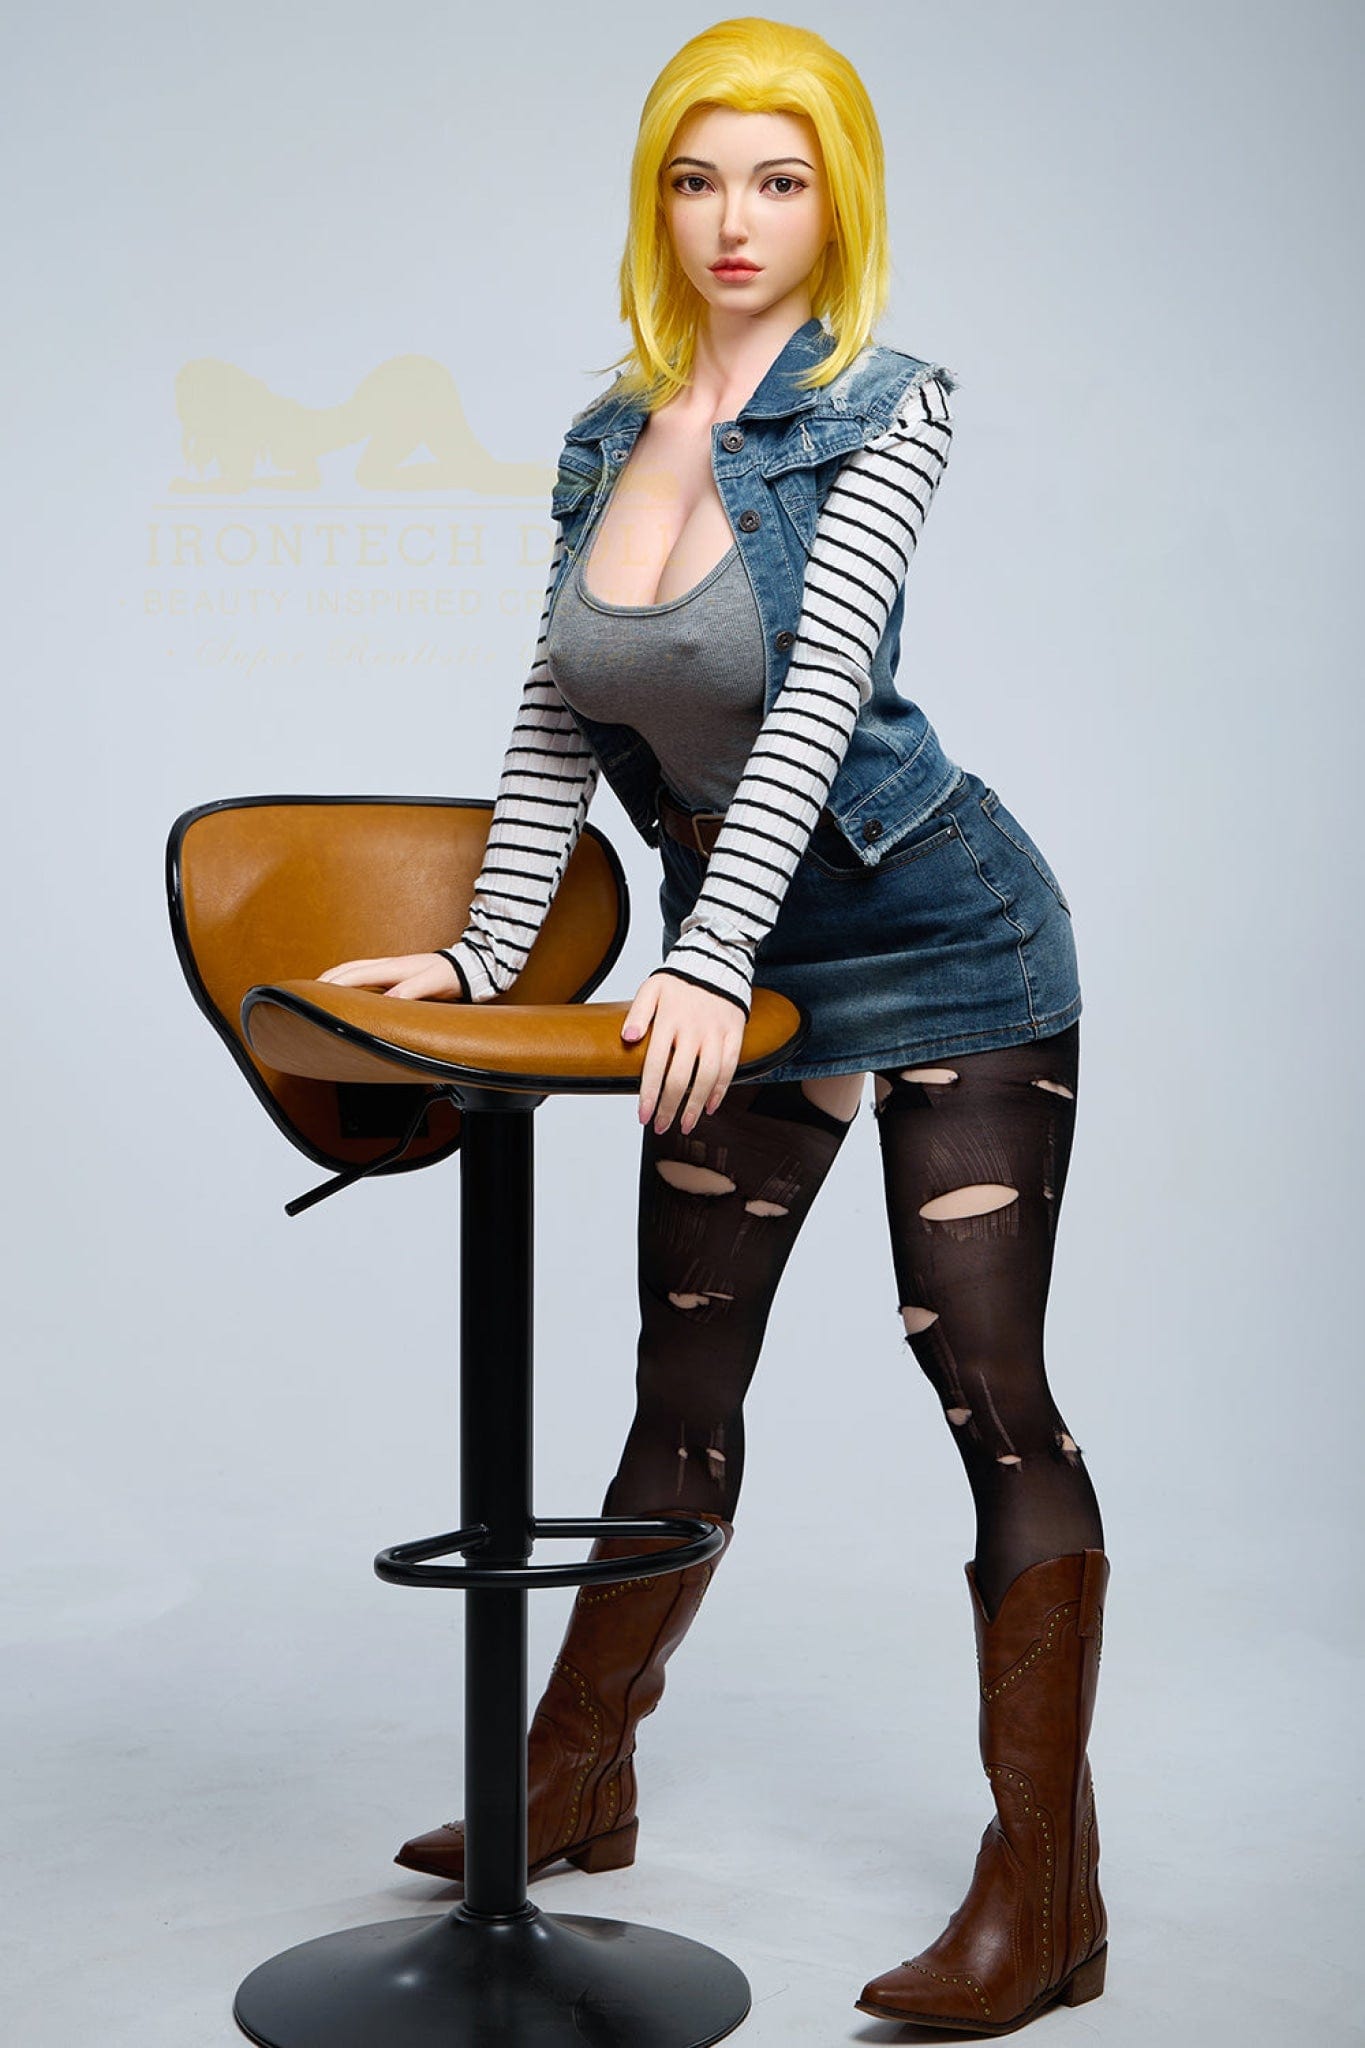 Doll Authority SEX DOLL 5'2" (159cm) - E-Cup Silicone Body Ashley Realistic Silicone Sex Doll - Super Realistic Silicone Series - IronTech Doll®